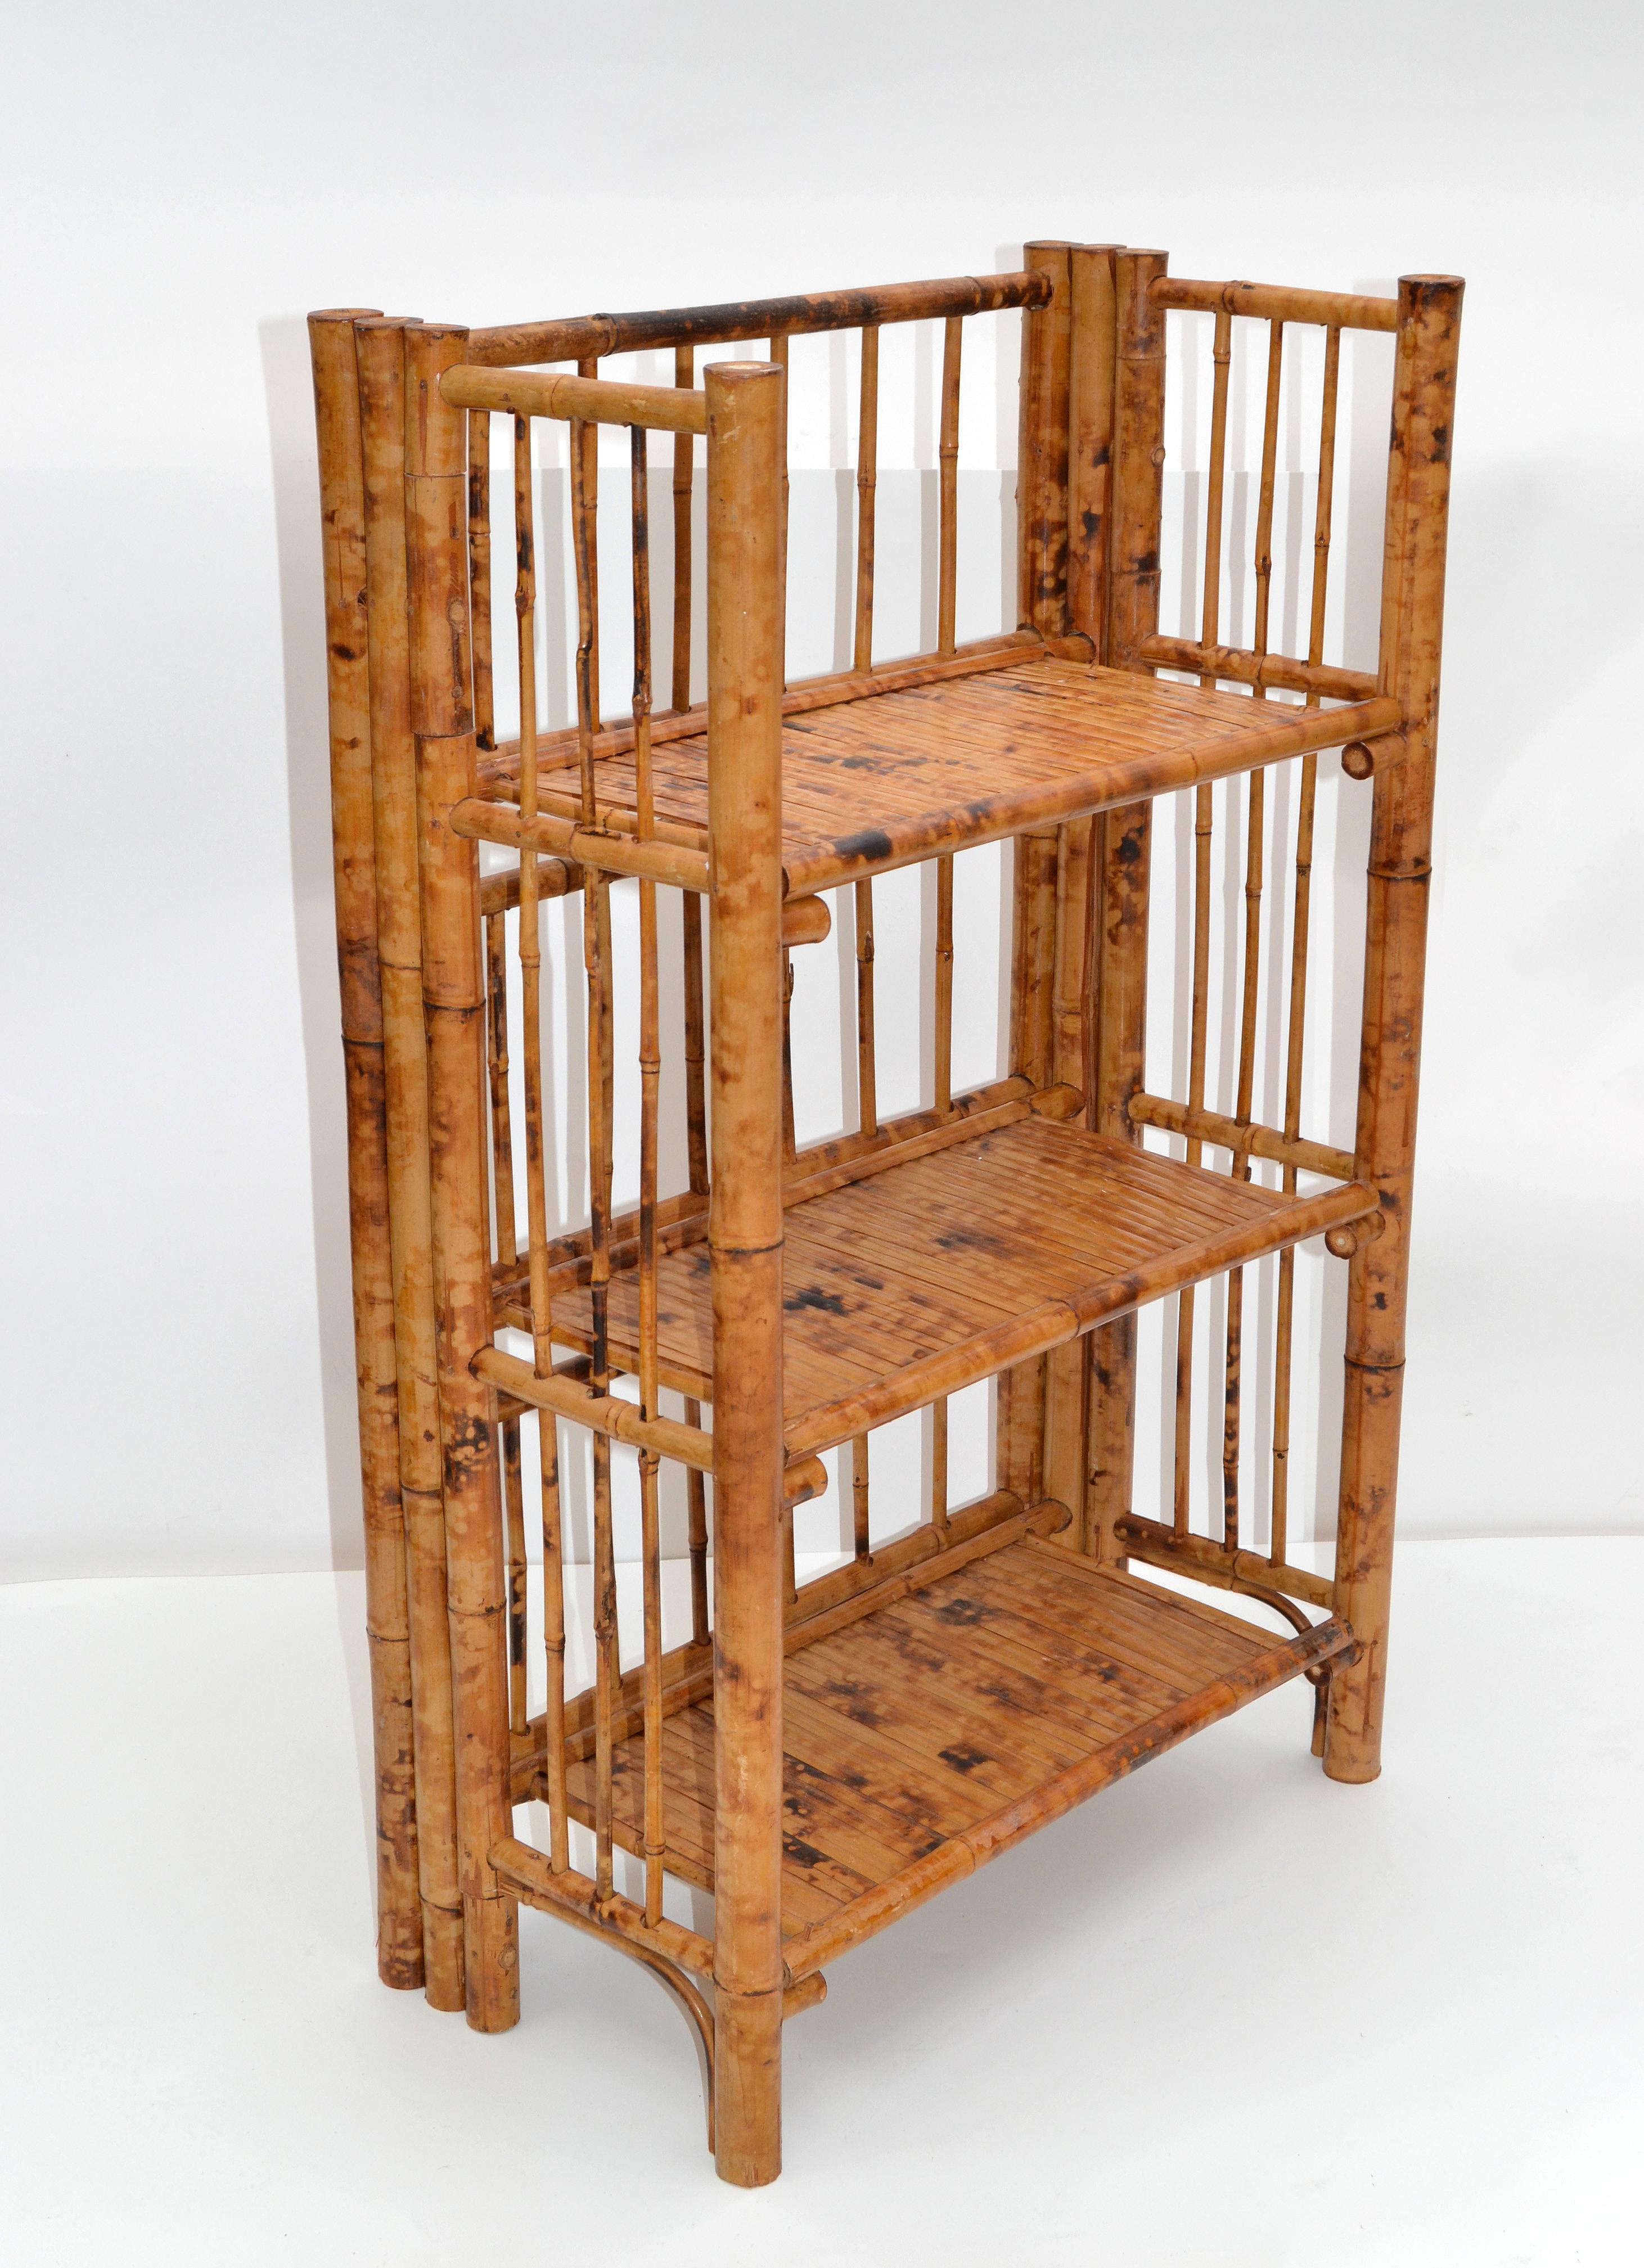 Bohemian style Mid-Century Modern handcrafted bamboo and cane folding storage, book or bathroom storage shelves.
The shelves are sturdy and easy to store.
Measure folded: Height 31.5 inches x depth 4 inches x width 20 inches.